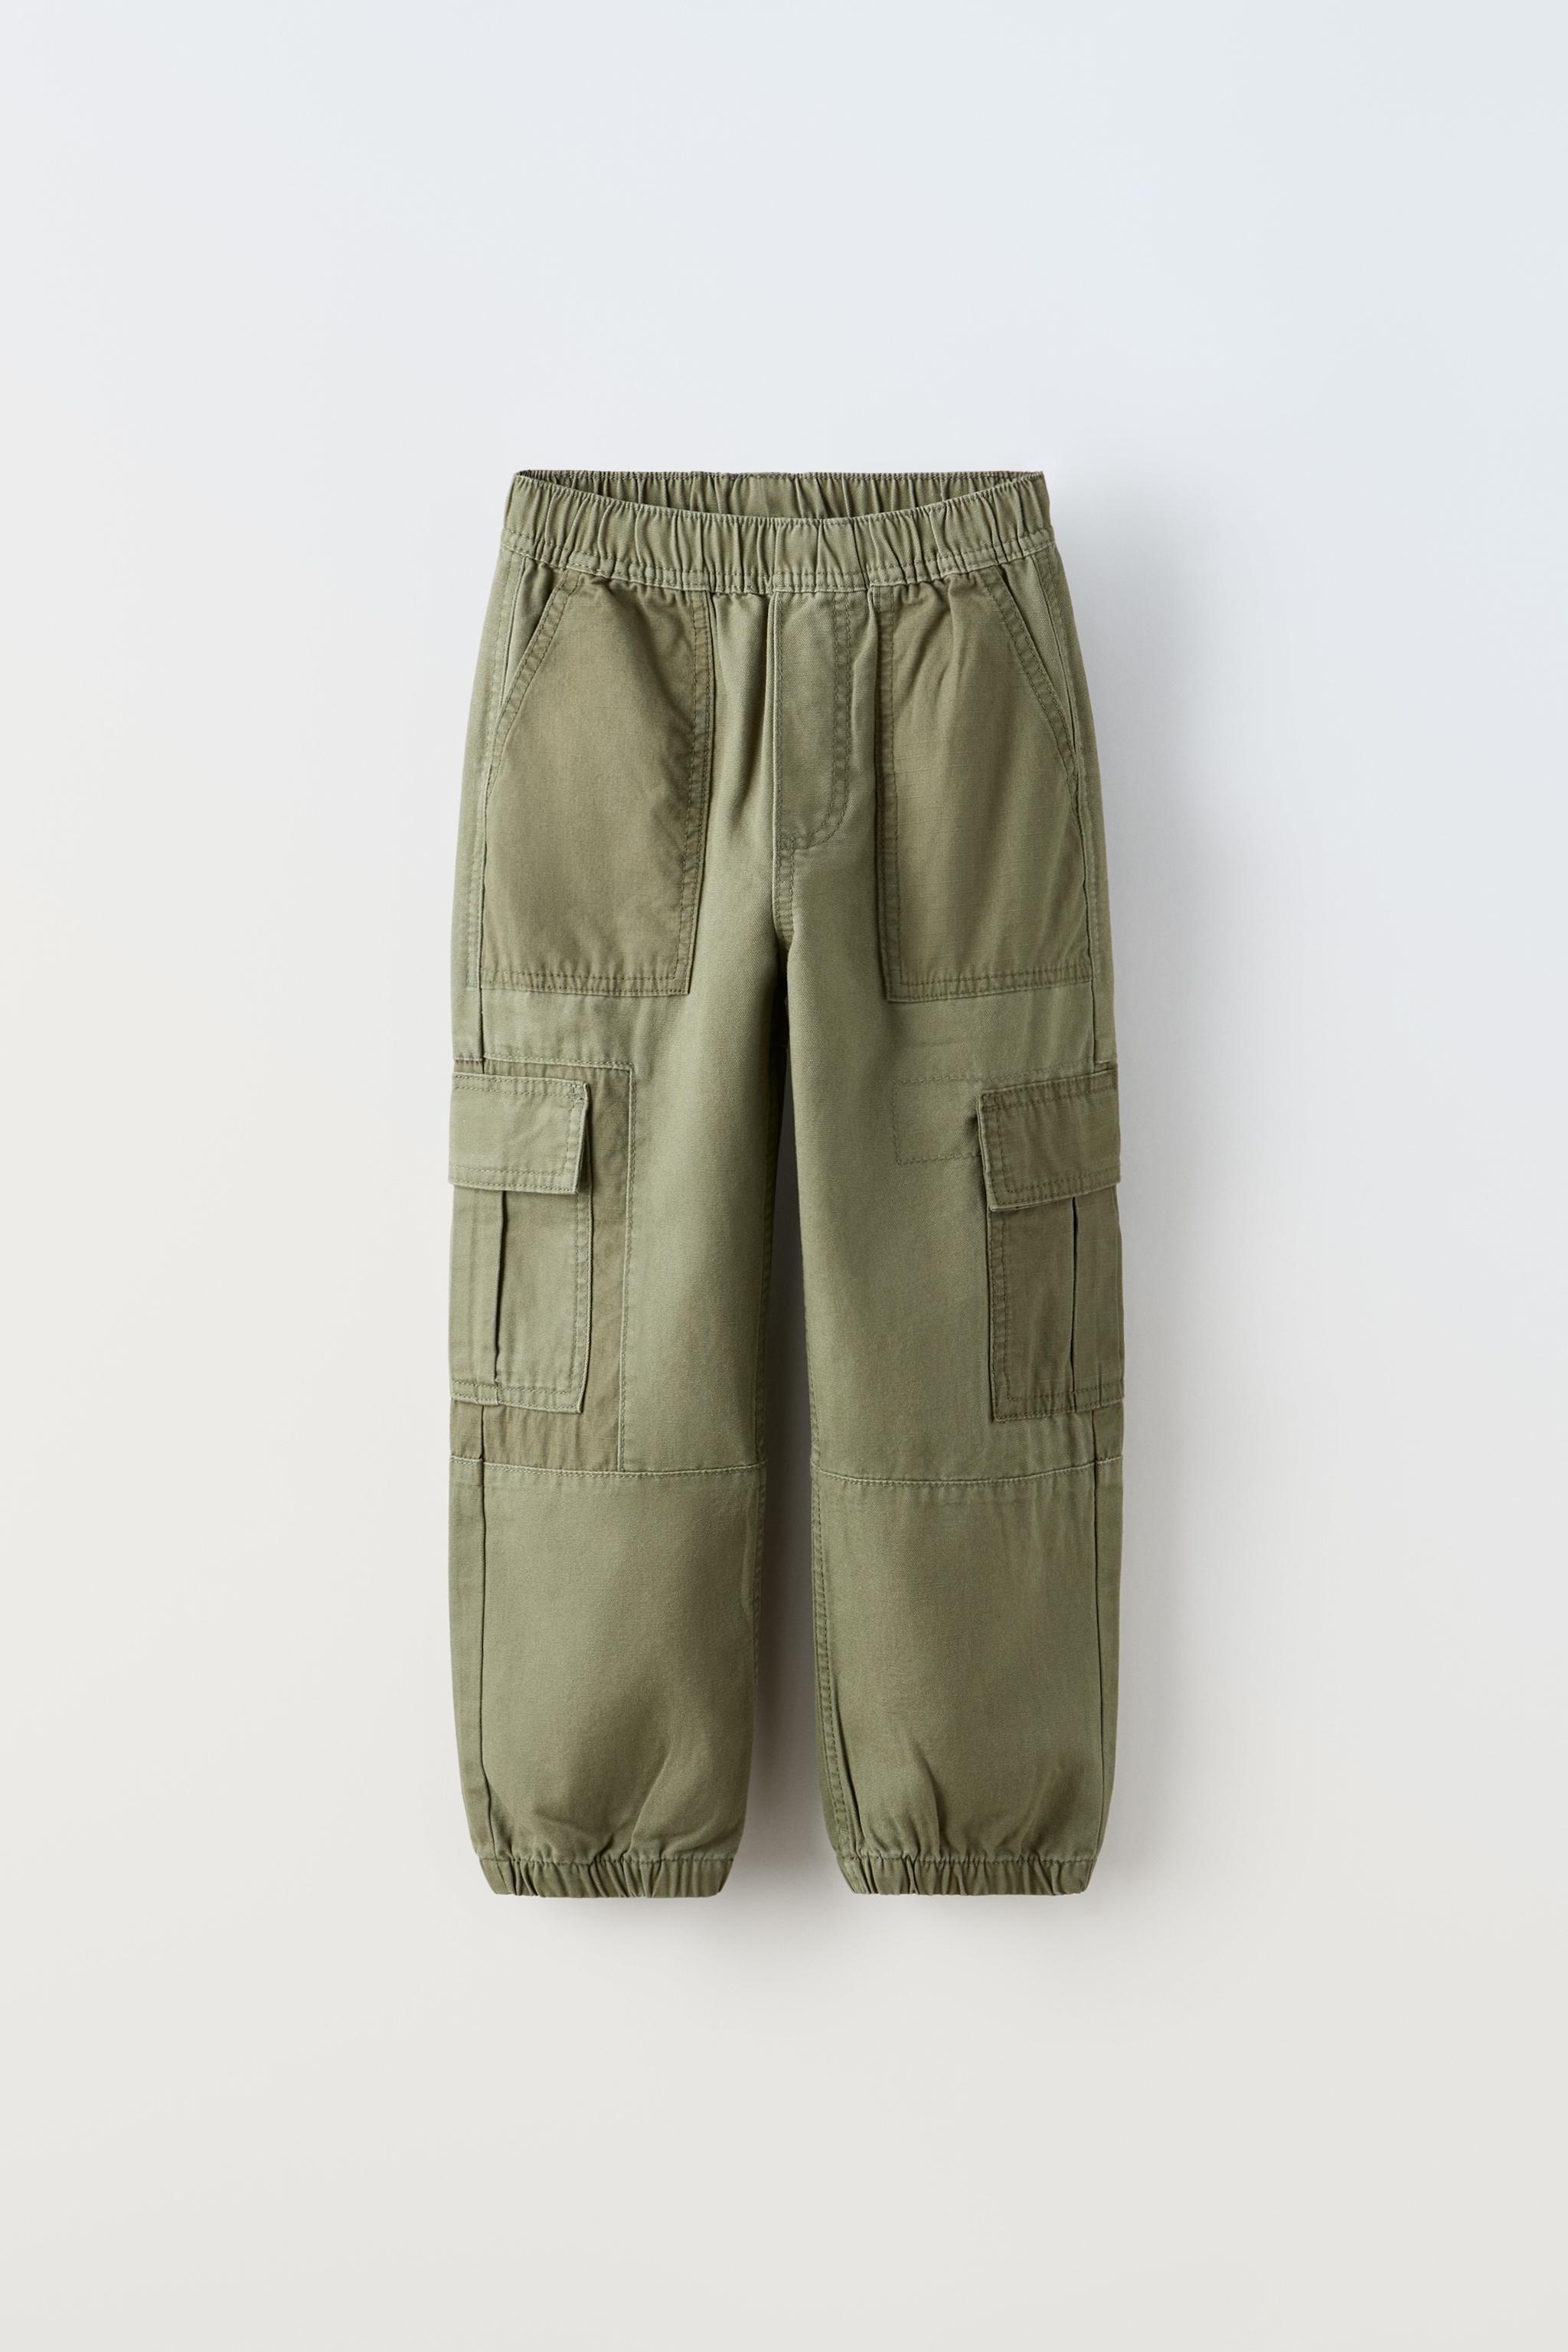 LINED CARGO PANTS - Mink brown